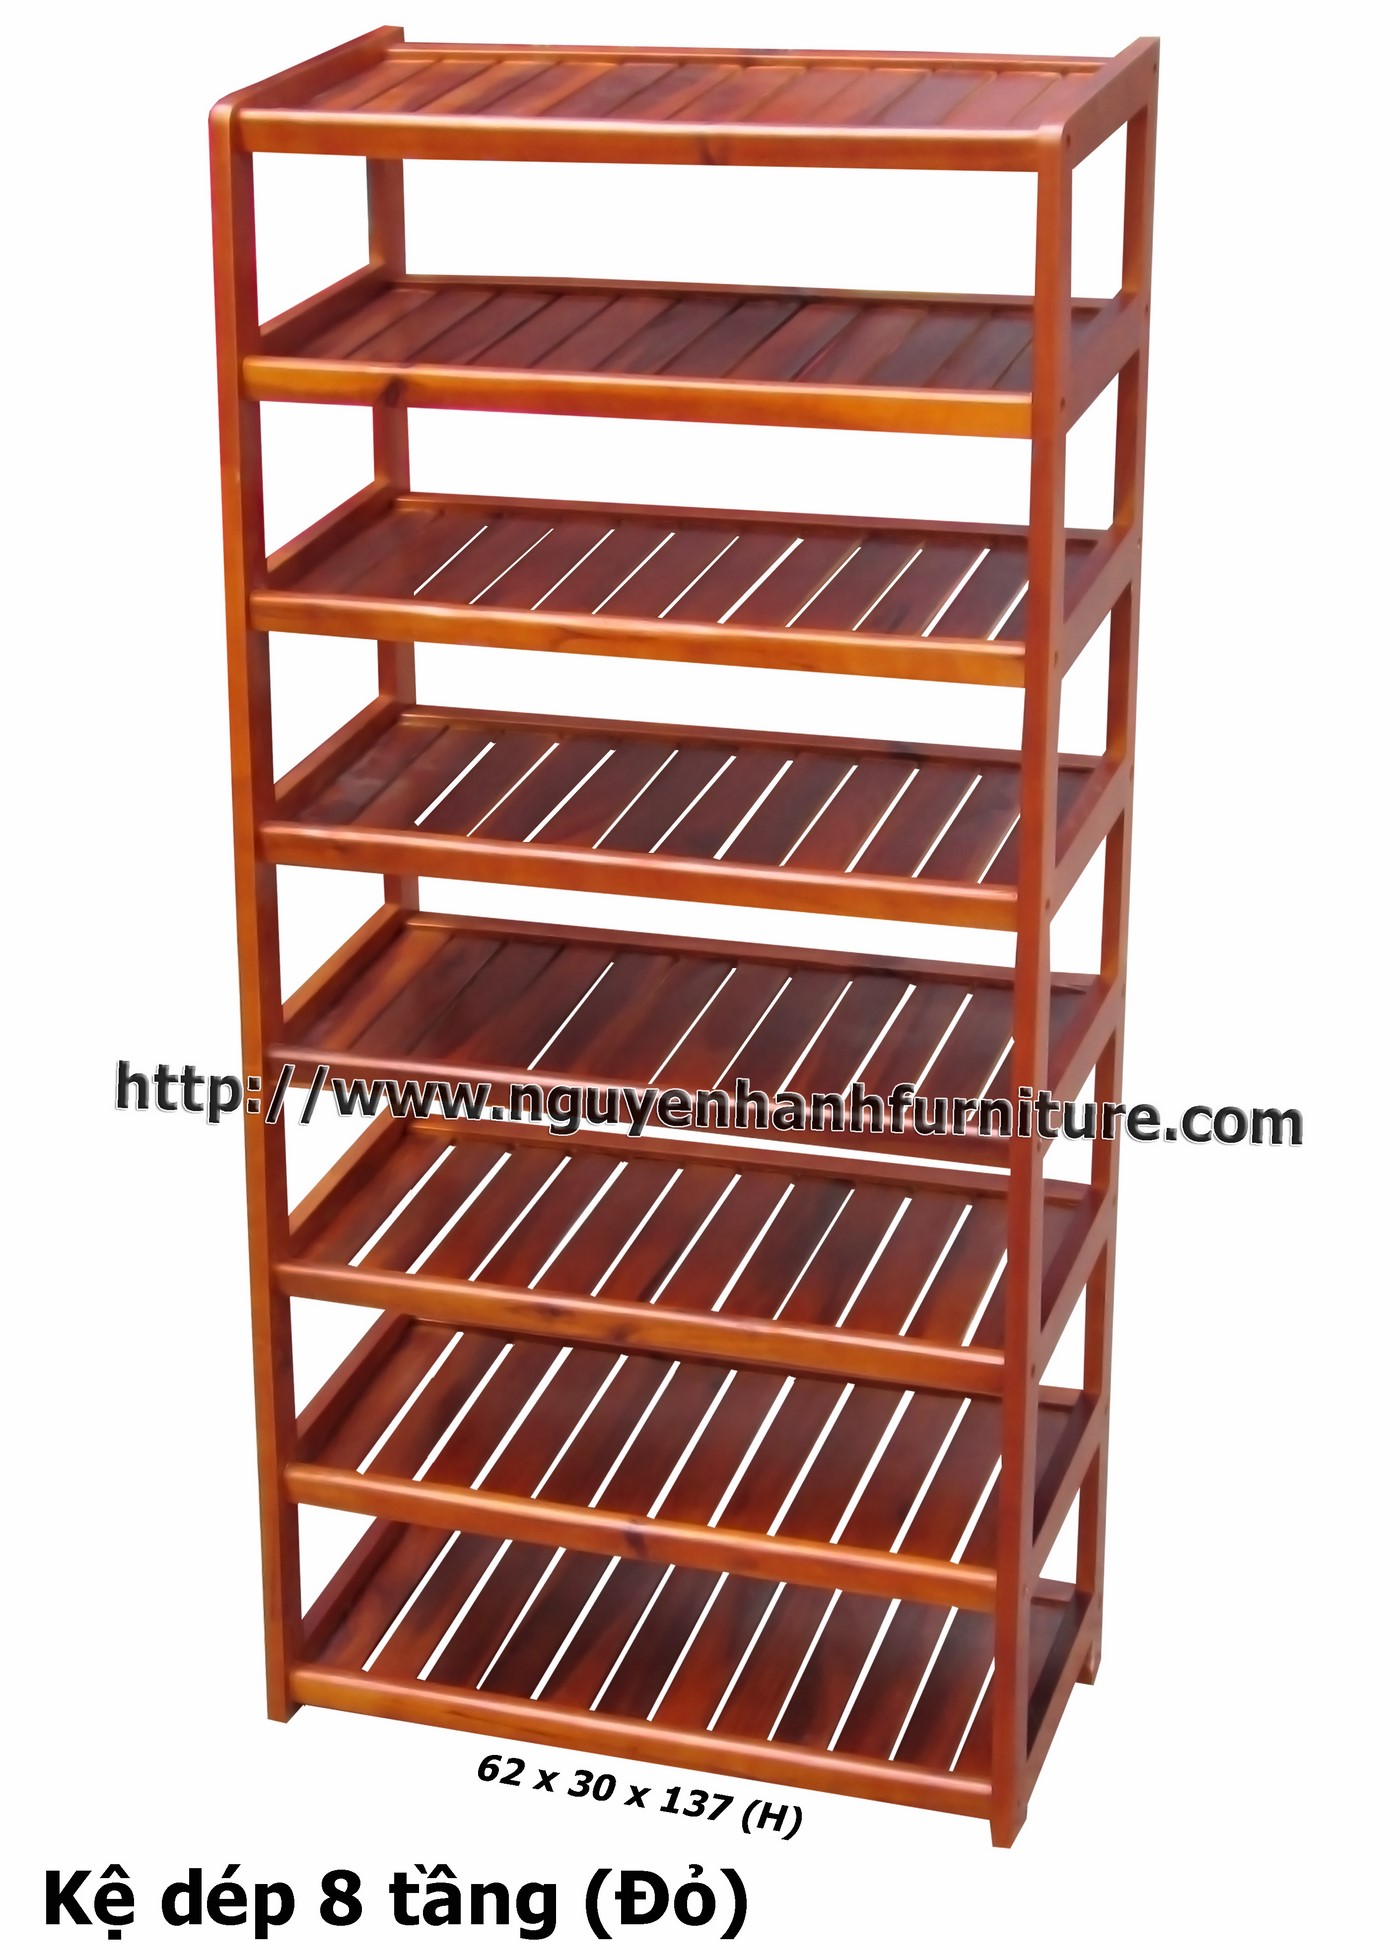 Name product: 8 storey Shoeshelf with sparse blades (yellow) - Dimensions: 62 x 30 x 137 (H) - Description: Wood natural rubber